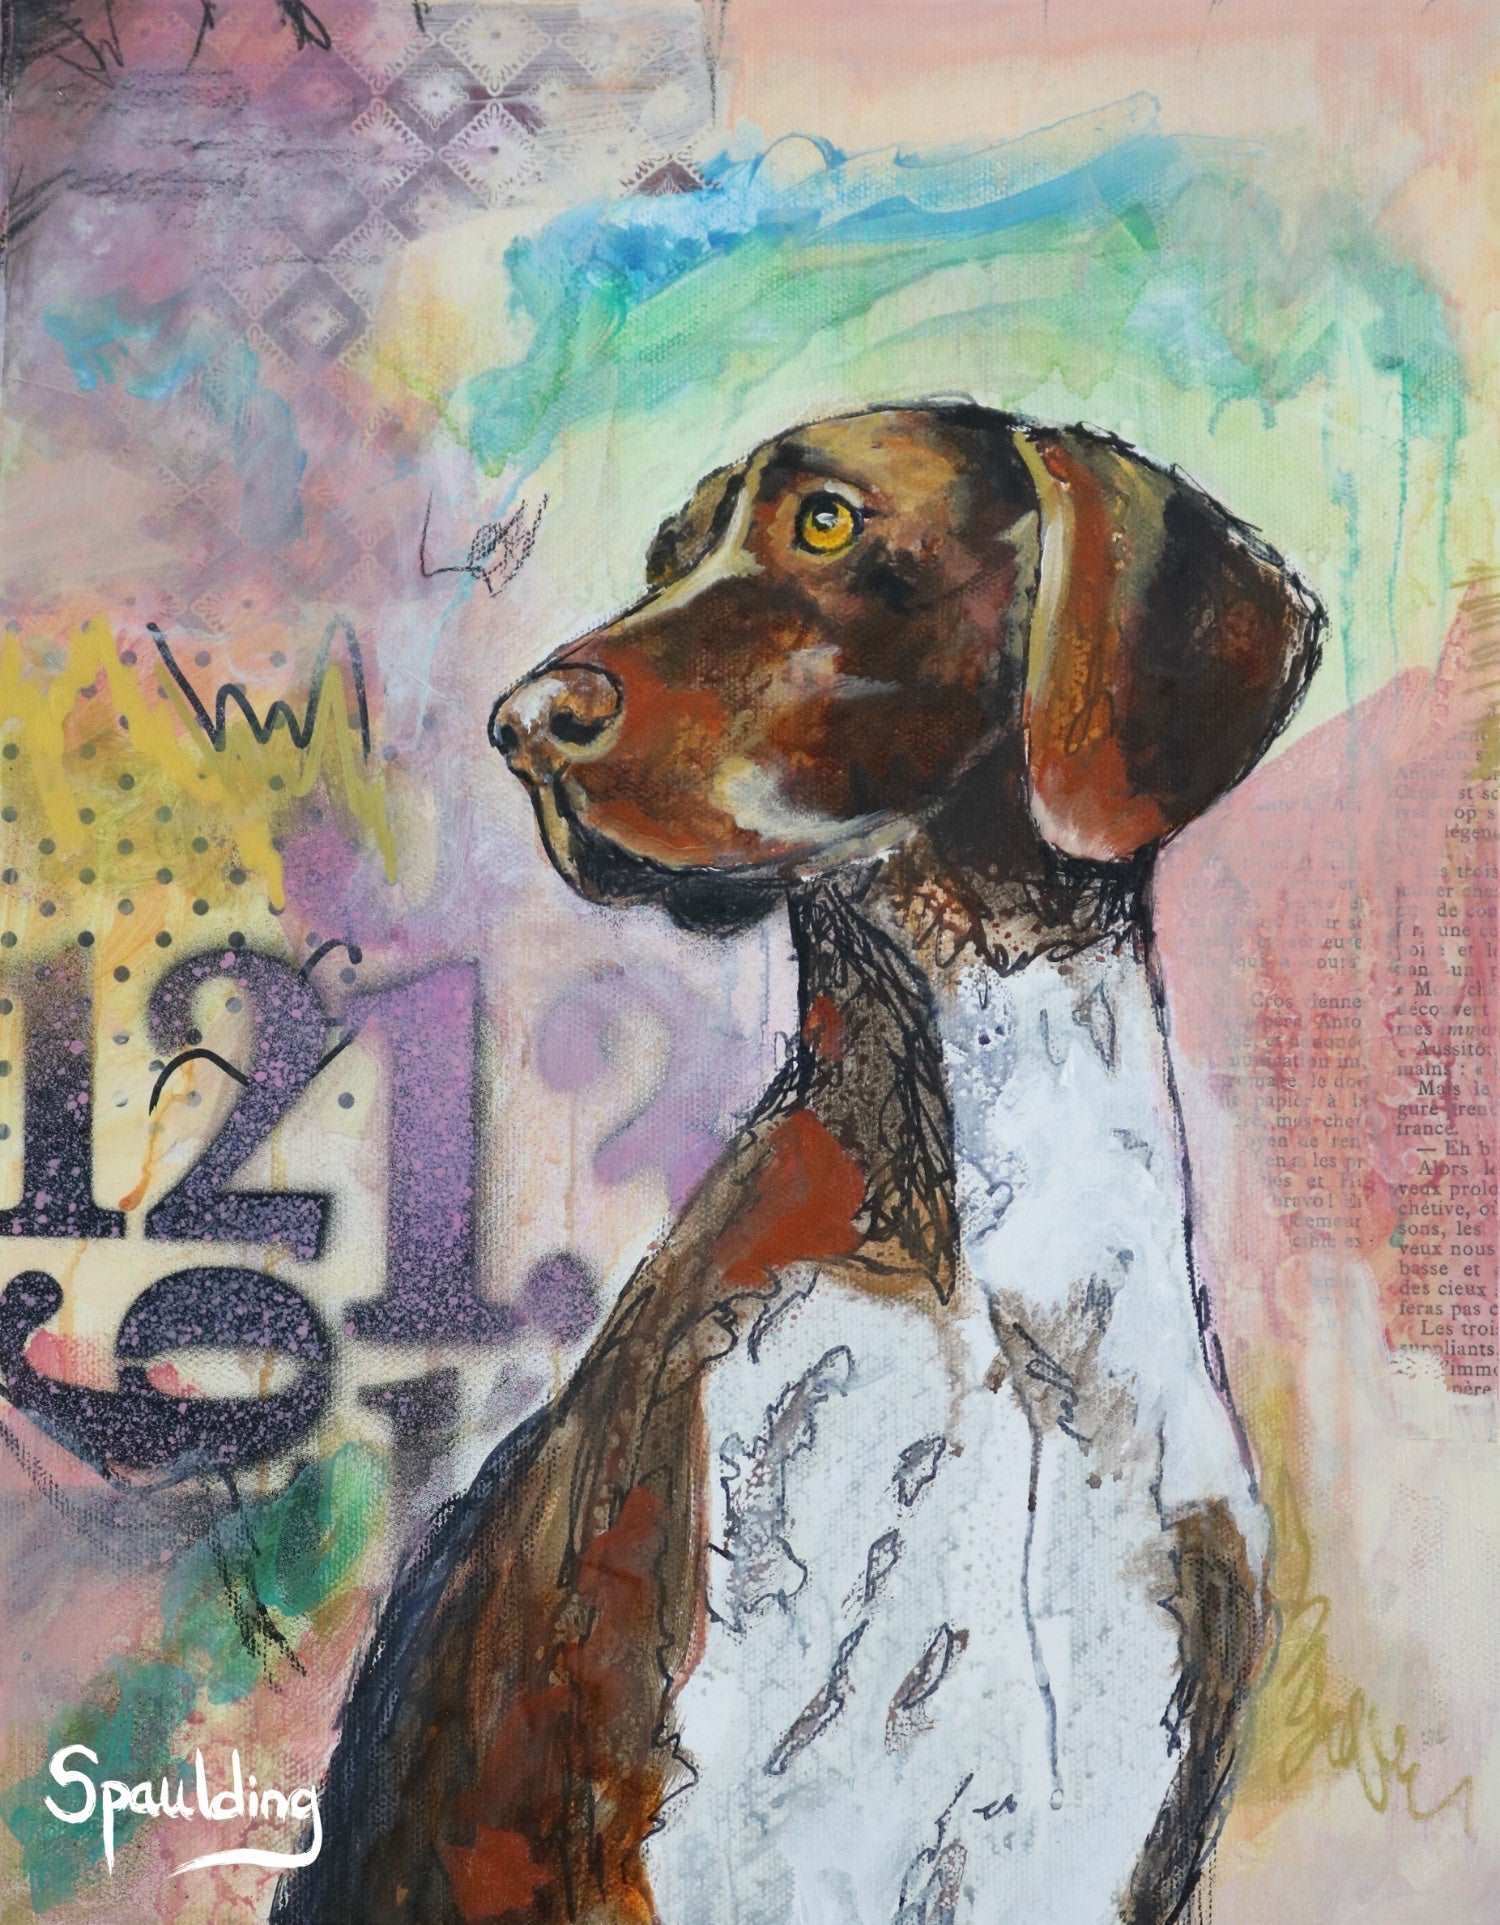 German Shorthair Pointer dog portrait on canvas. Background is pink, peach, teal, green, yellow and white.